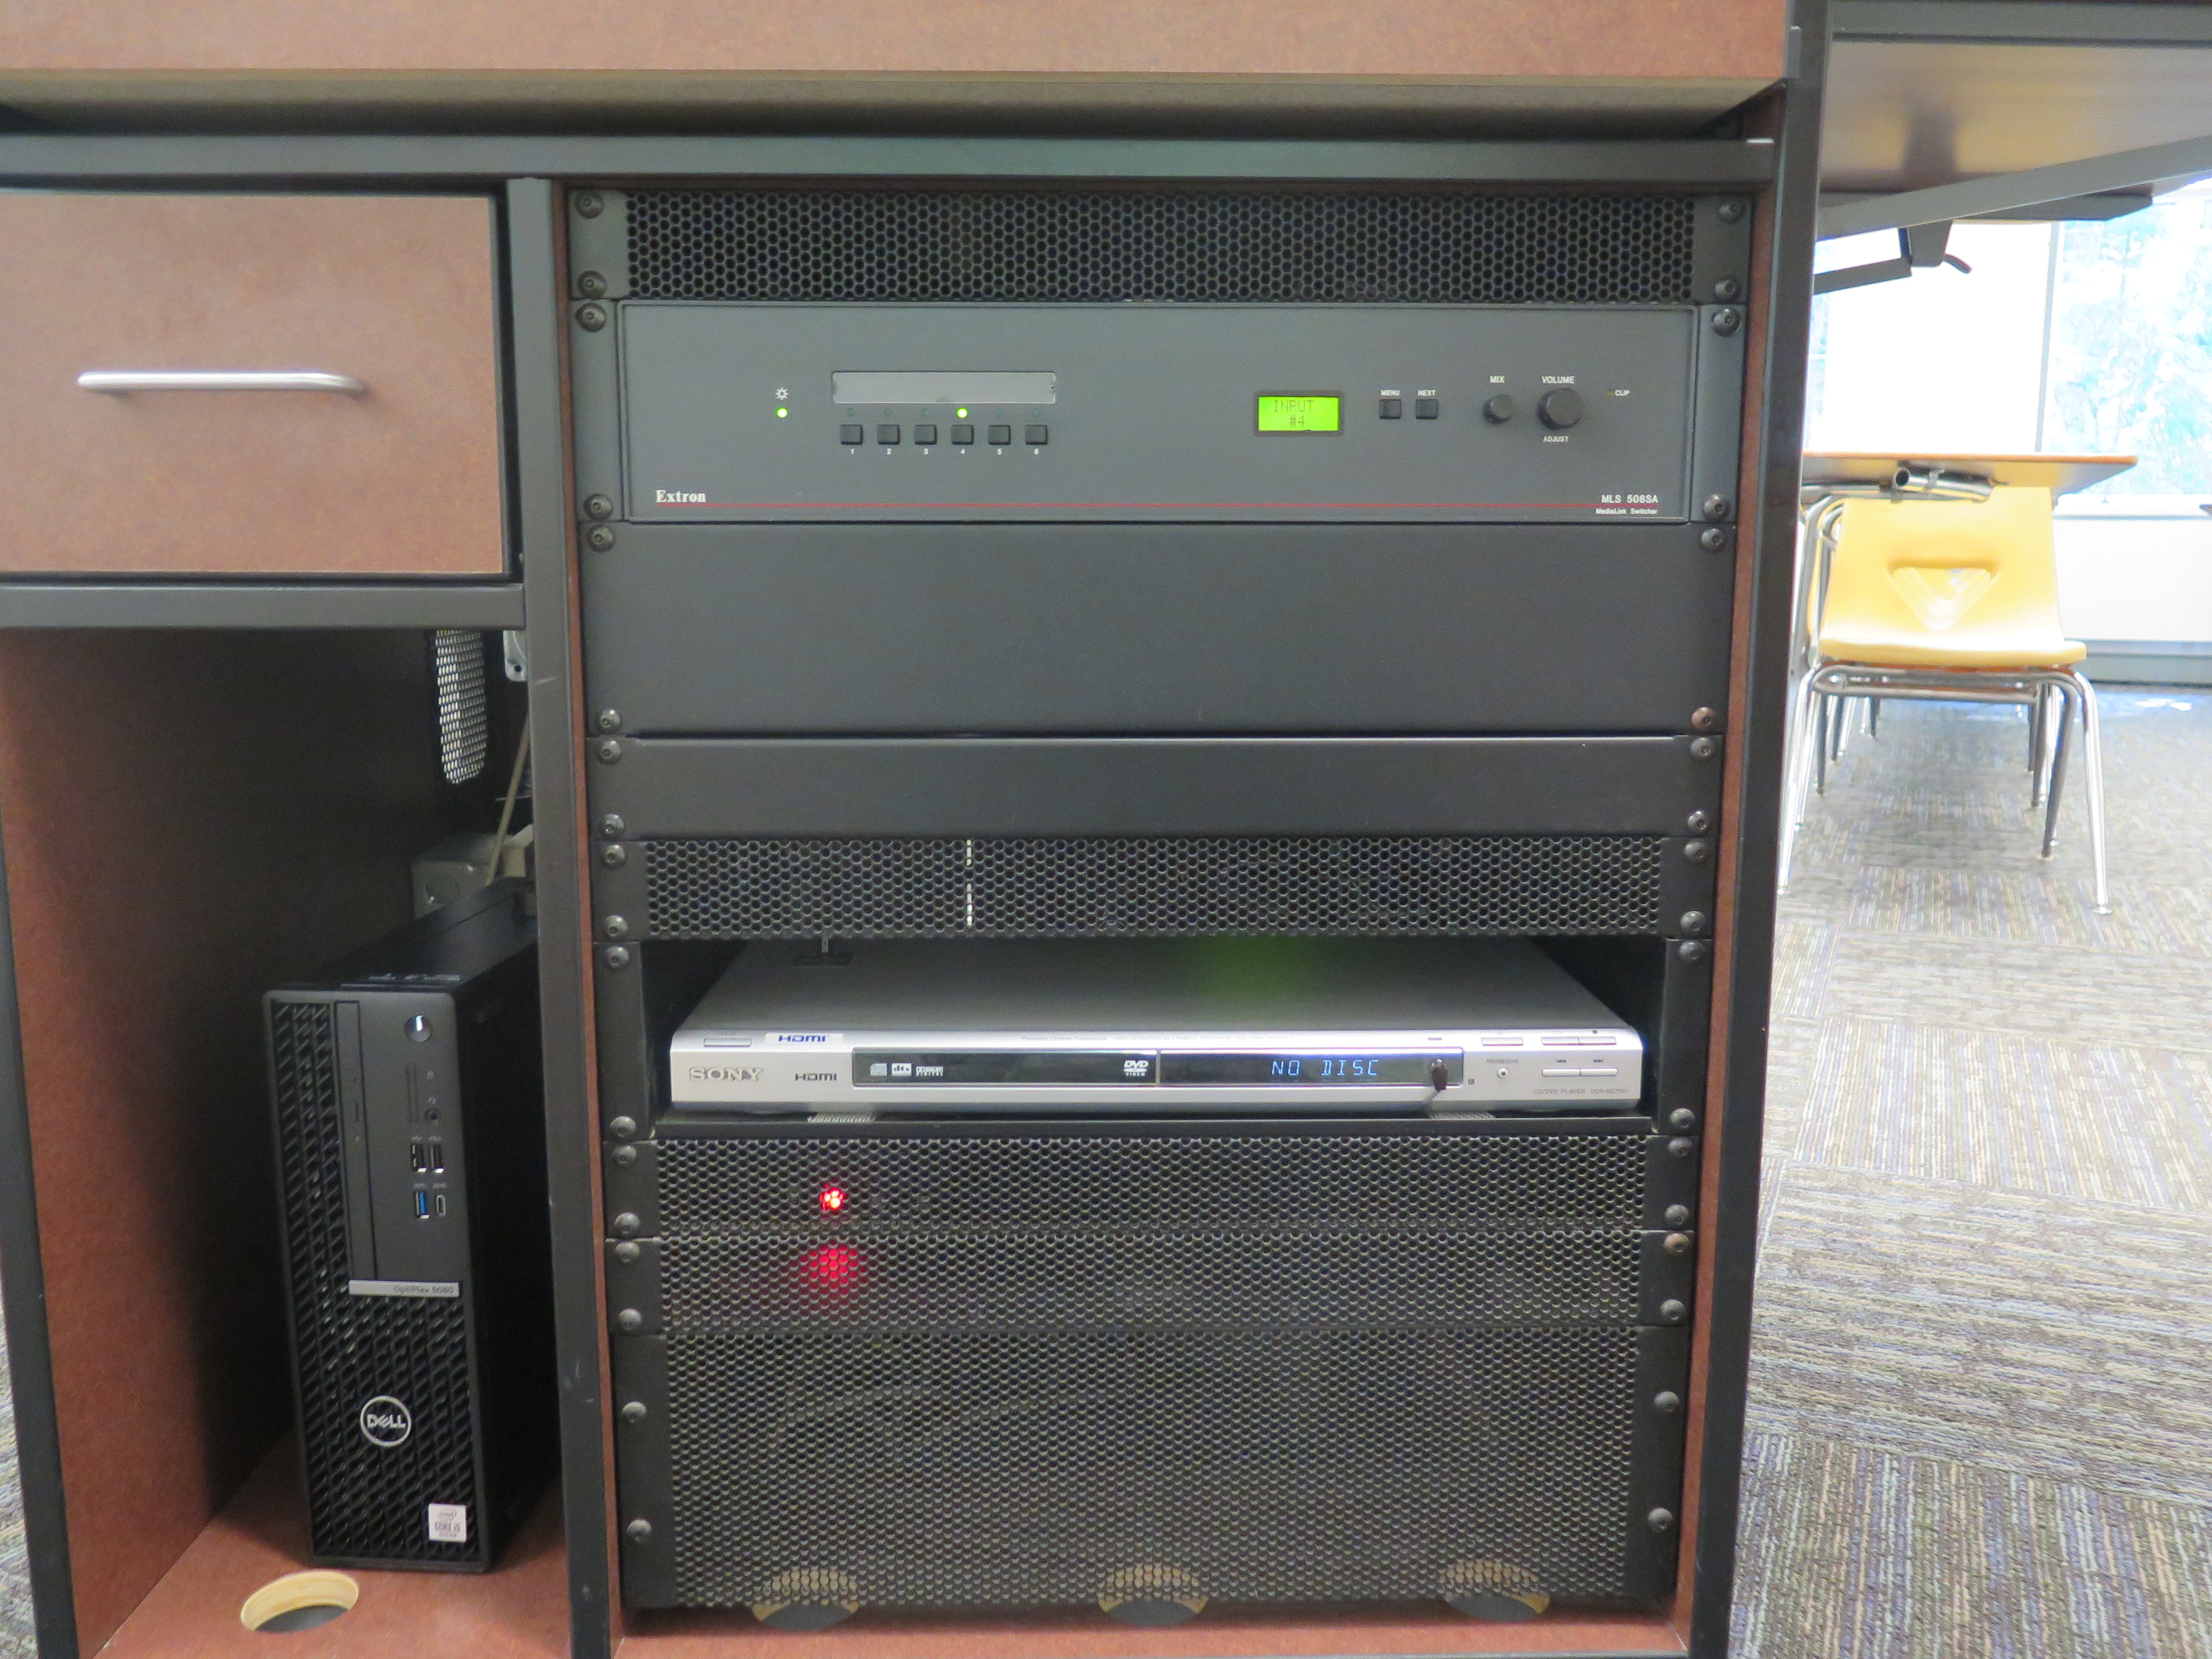 Front of Equipment rack showing AV Switcher. Below that is DVD Player. To the left is the compartment with the Dell Computer CPU.